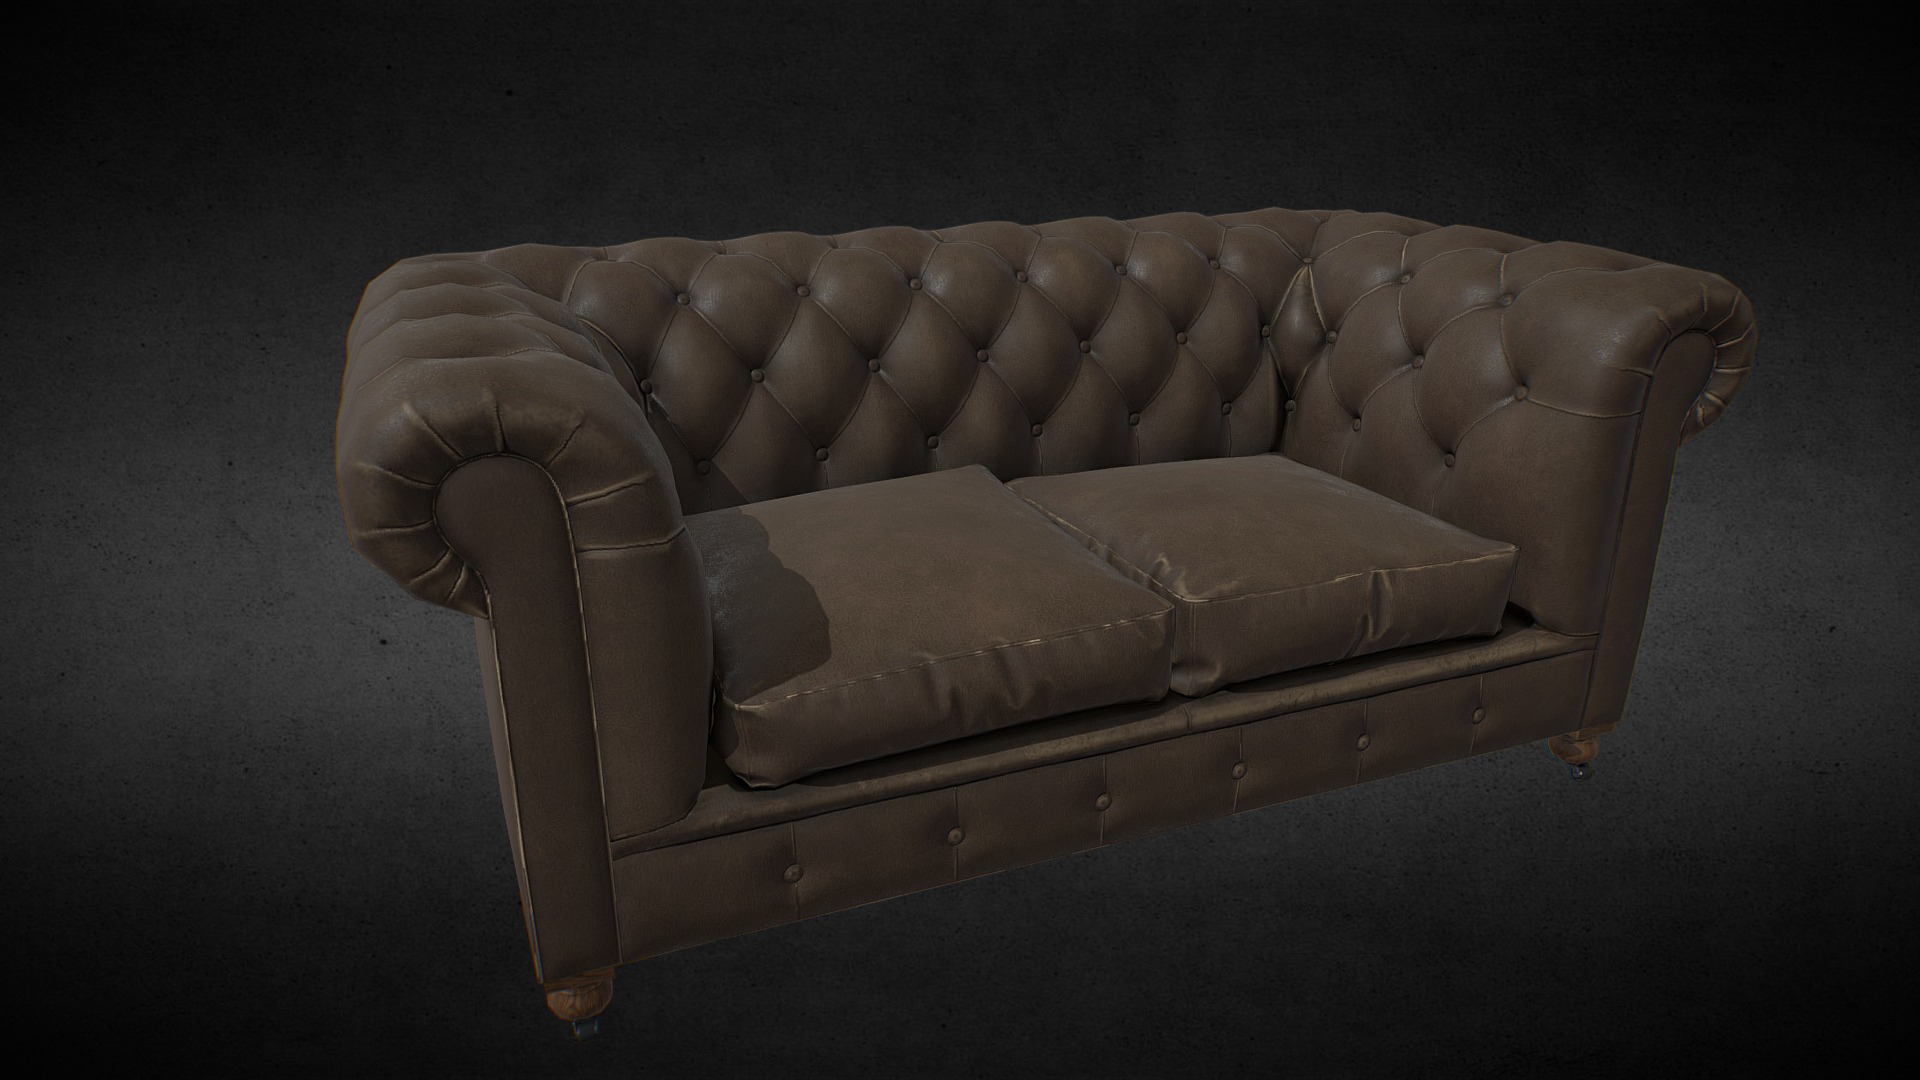 3D model Armchair04 - This is a 3D model of the Armchair04. The 3D model is about a brown leather couch.